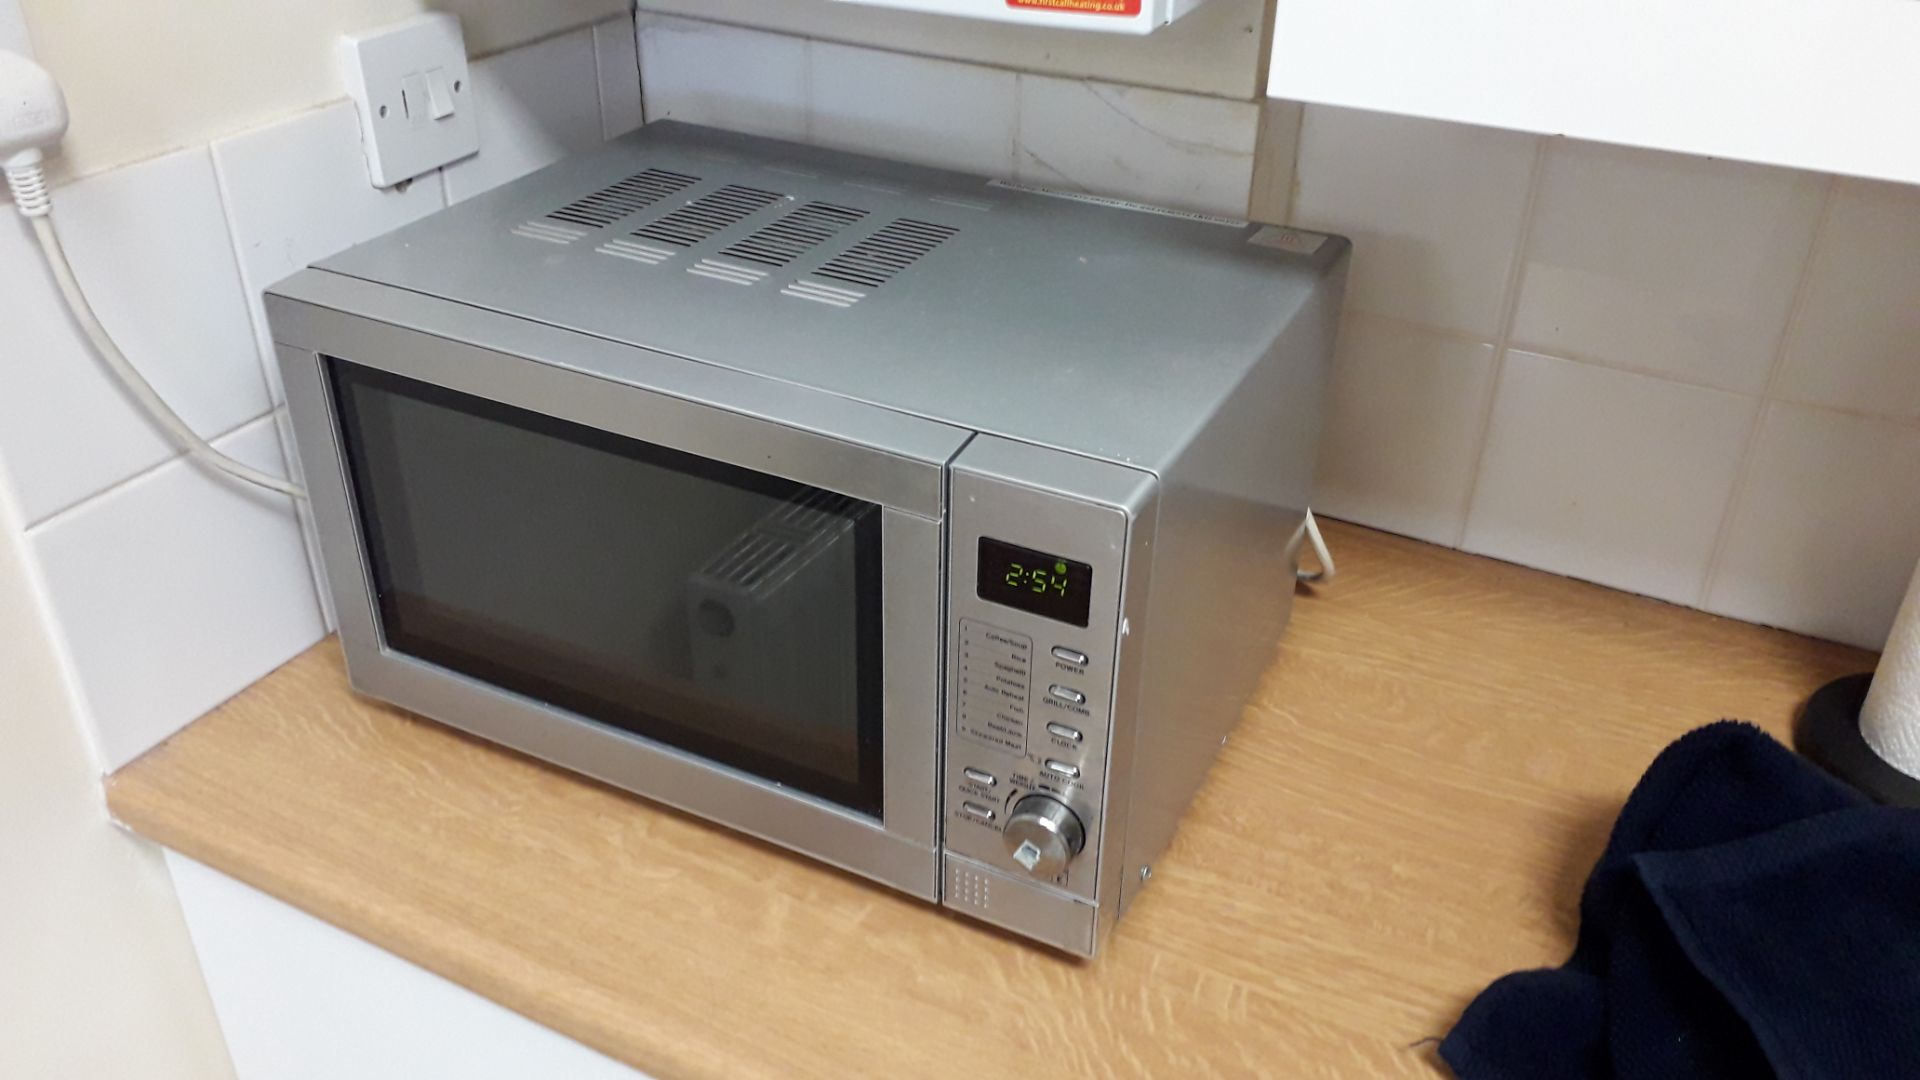 Contents of Kitchen to include Kenwood Stainless Steel Microwave Oven, Larder Refrigerator & Kitchen - Image 2 of 5